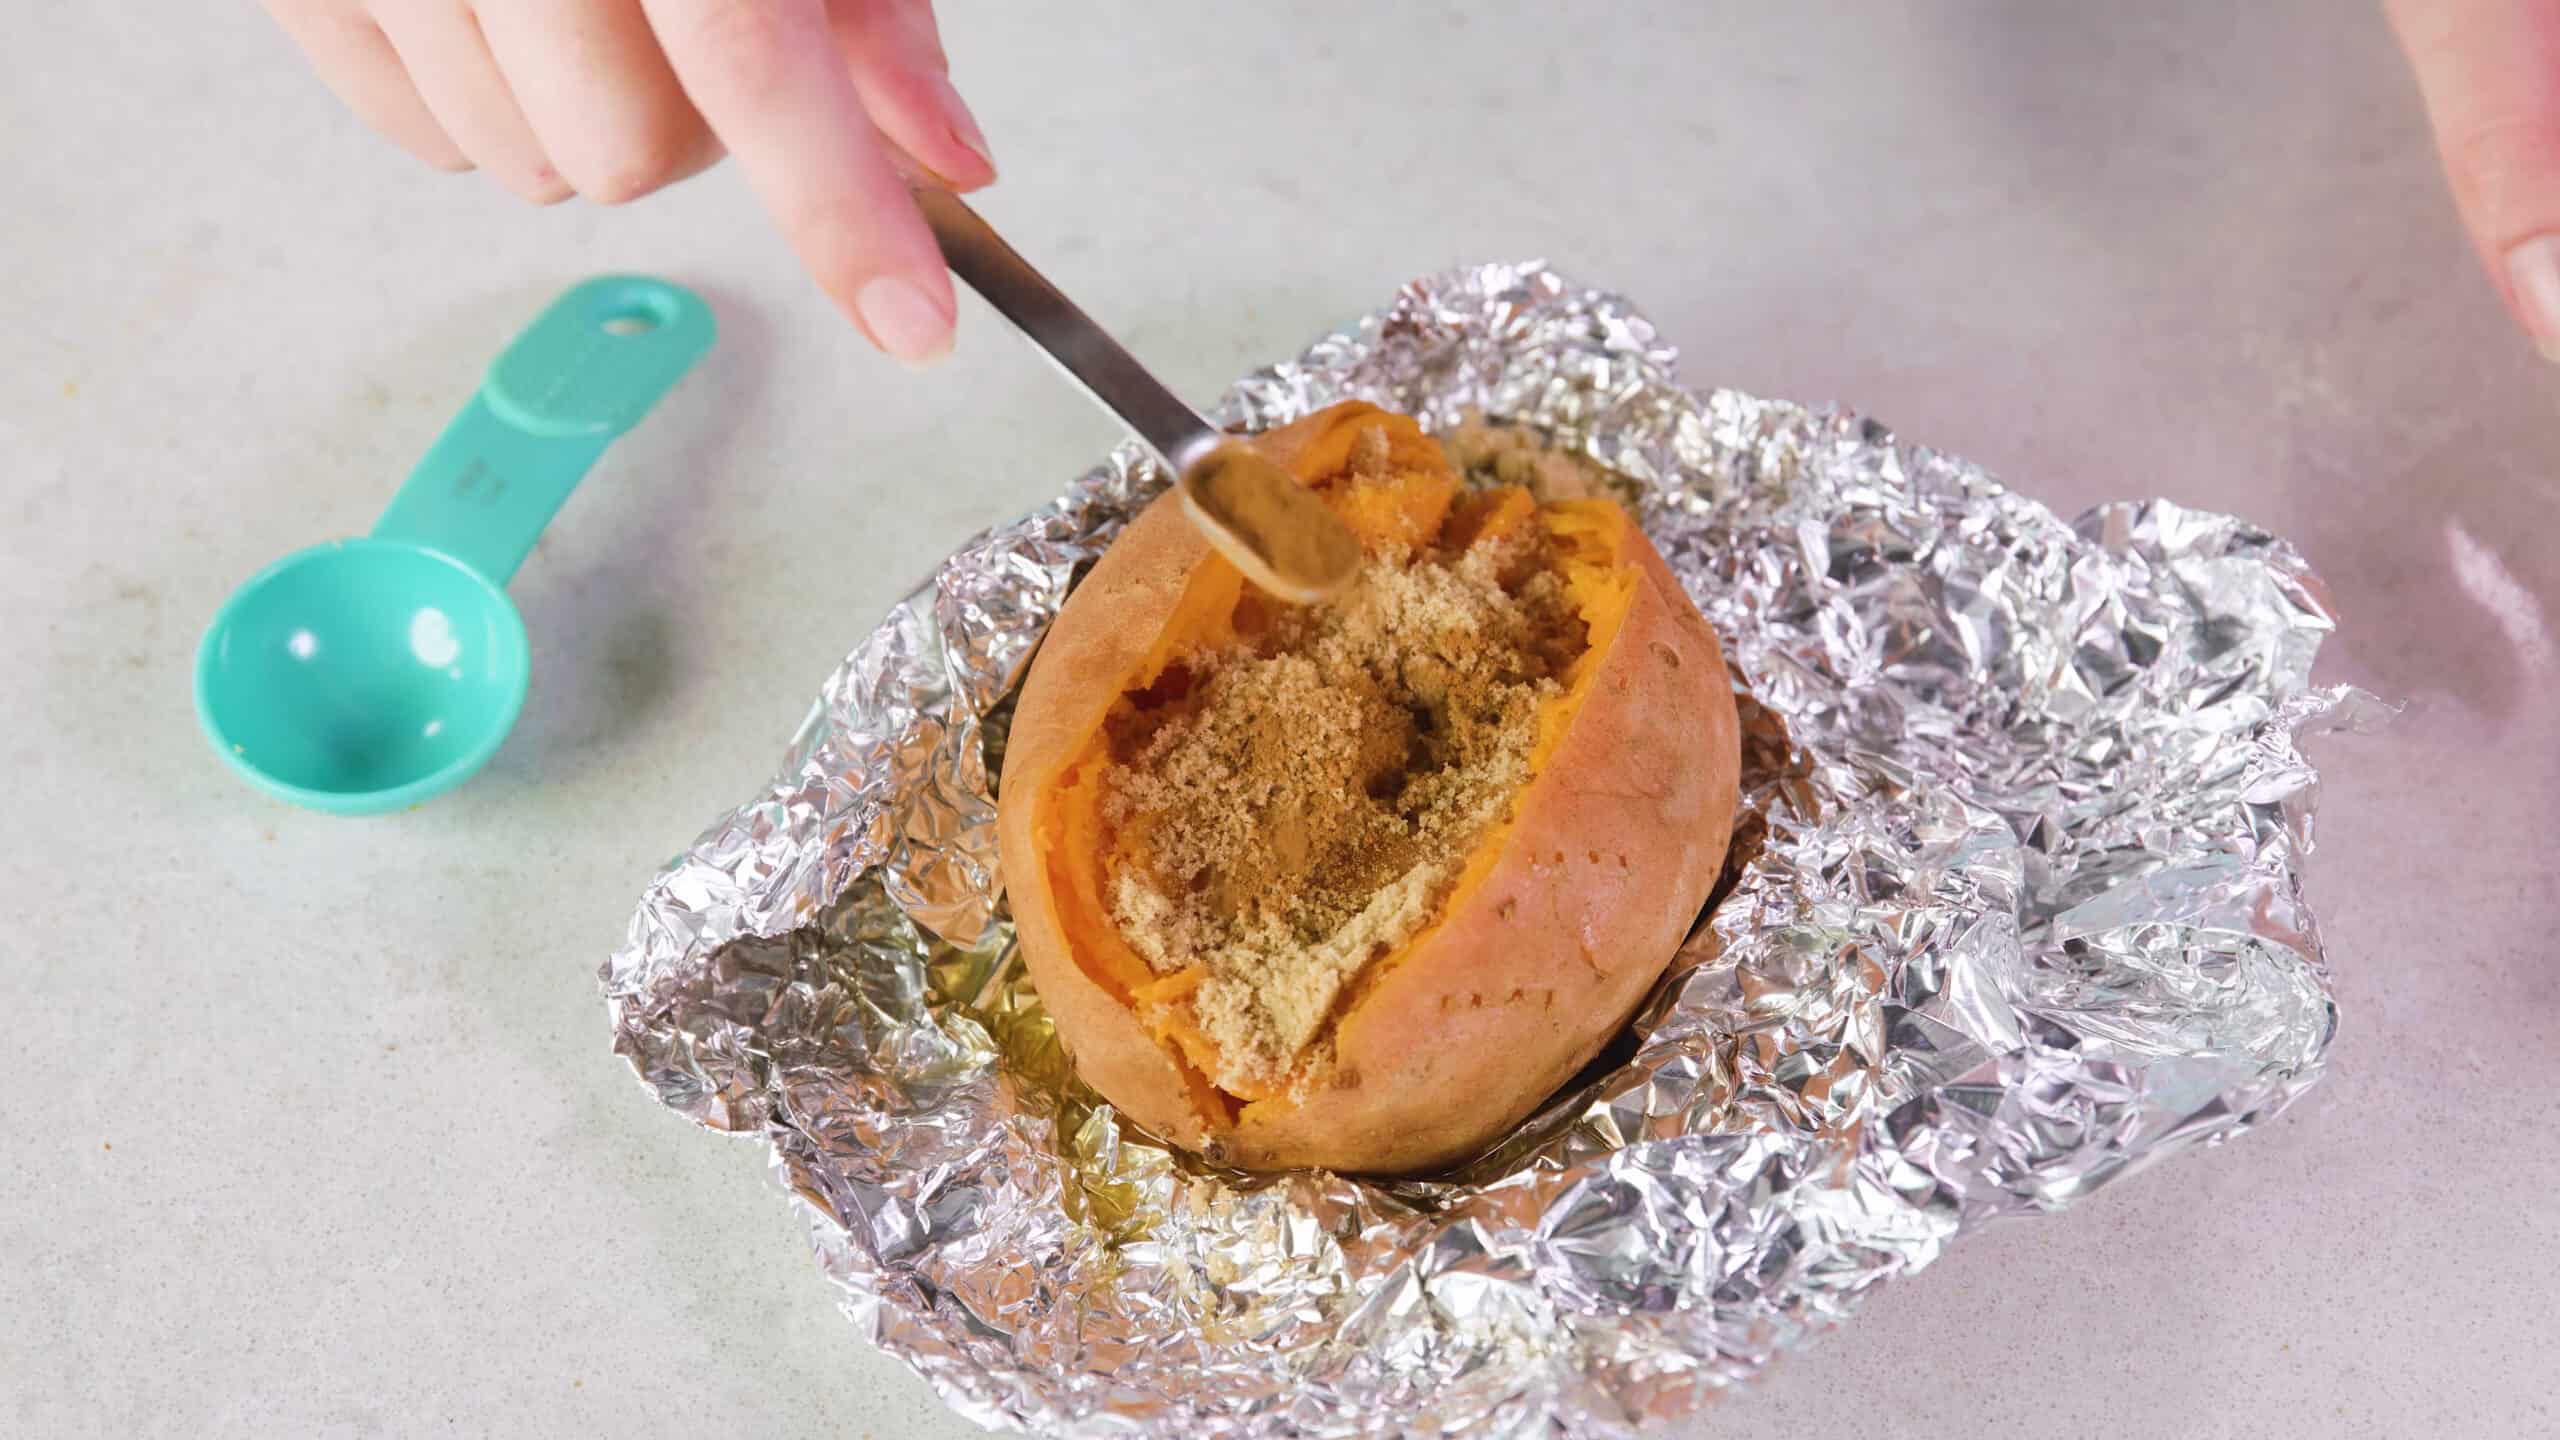 Overhead view an open smashed baked sweet potato with brown sugar being seasoned with cinnamon, all on aluminum foil wrapping on marble countertop.